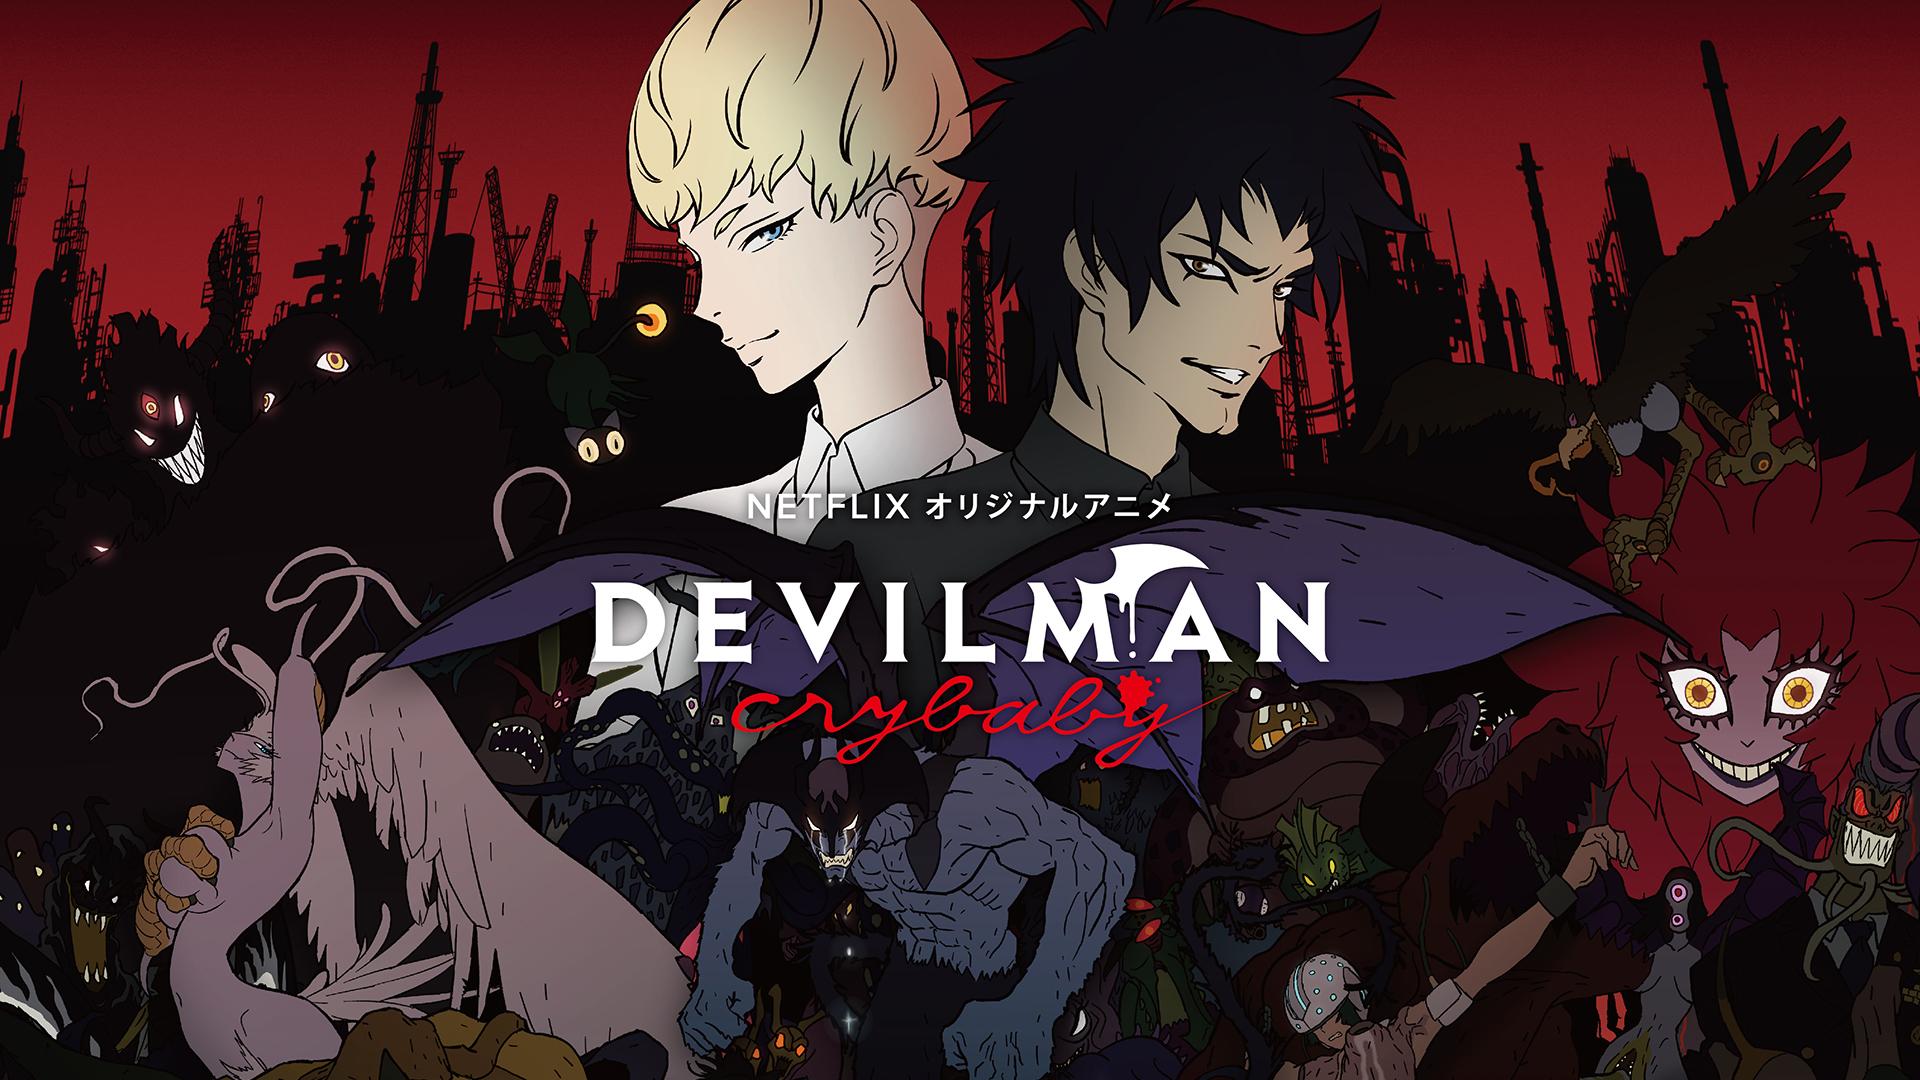 1920 x 1080 · jpeg - Review: Past meets present in the incredible Devilman crybaby - GameAxis